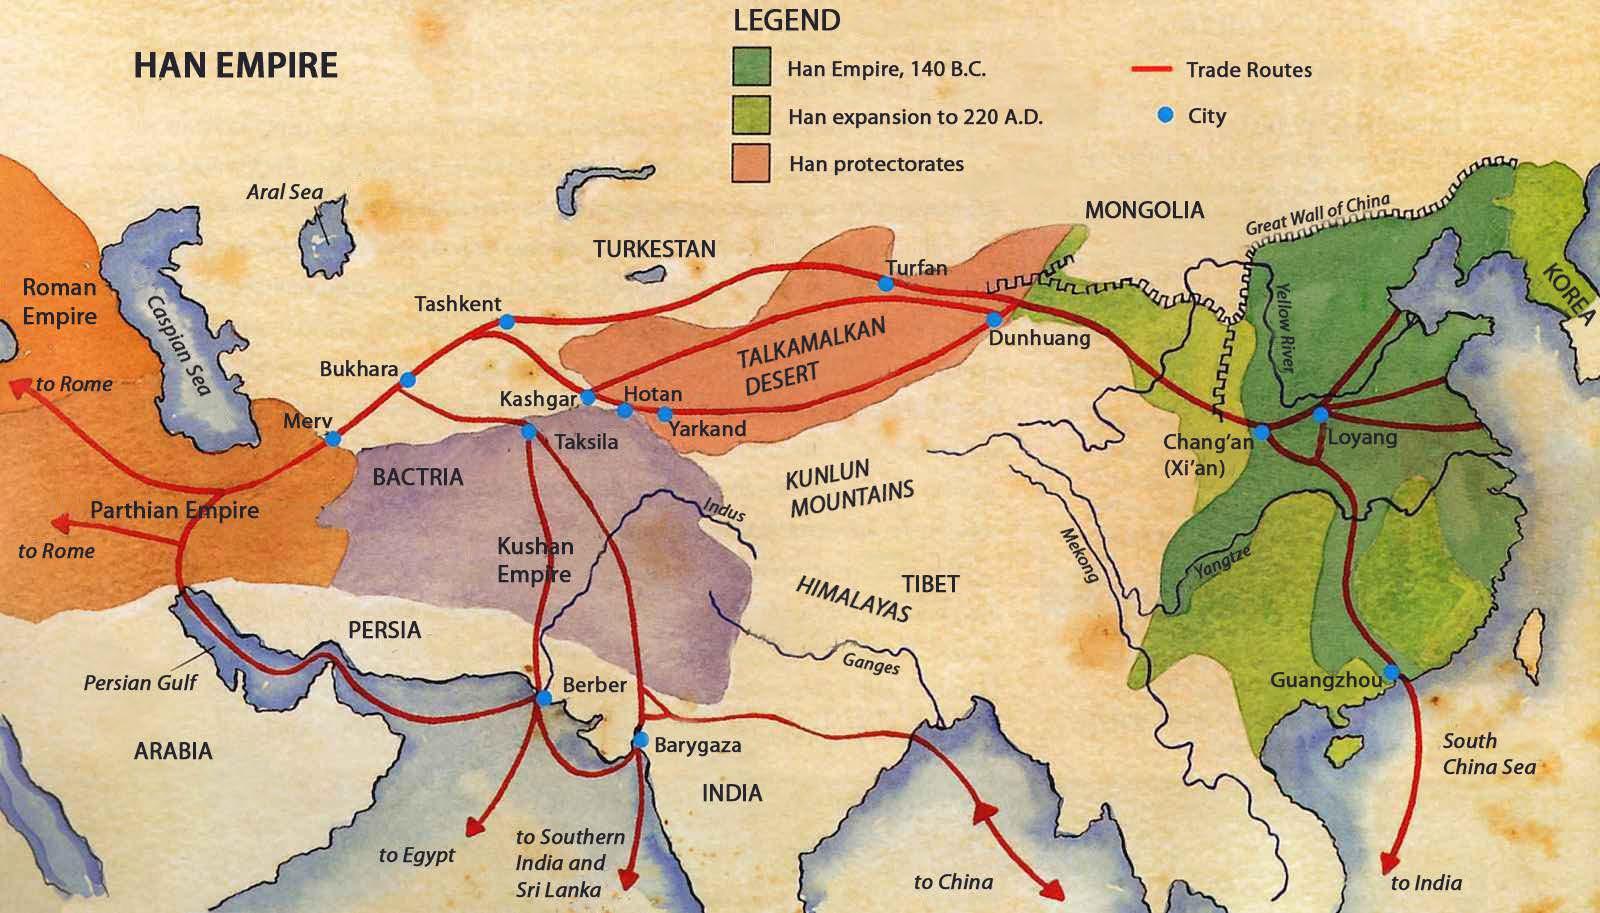 Map of the Silk Road trade routes during the Han Dynasty